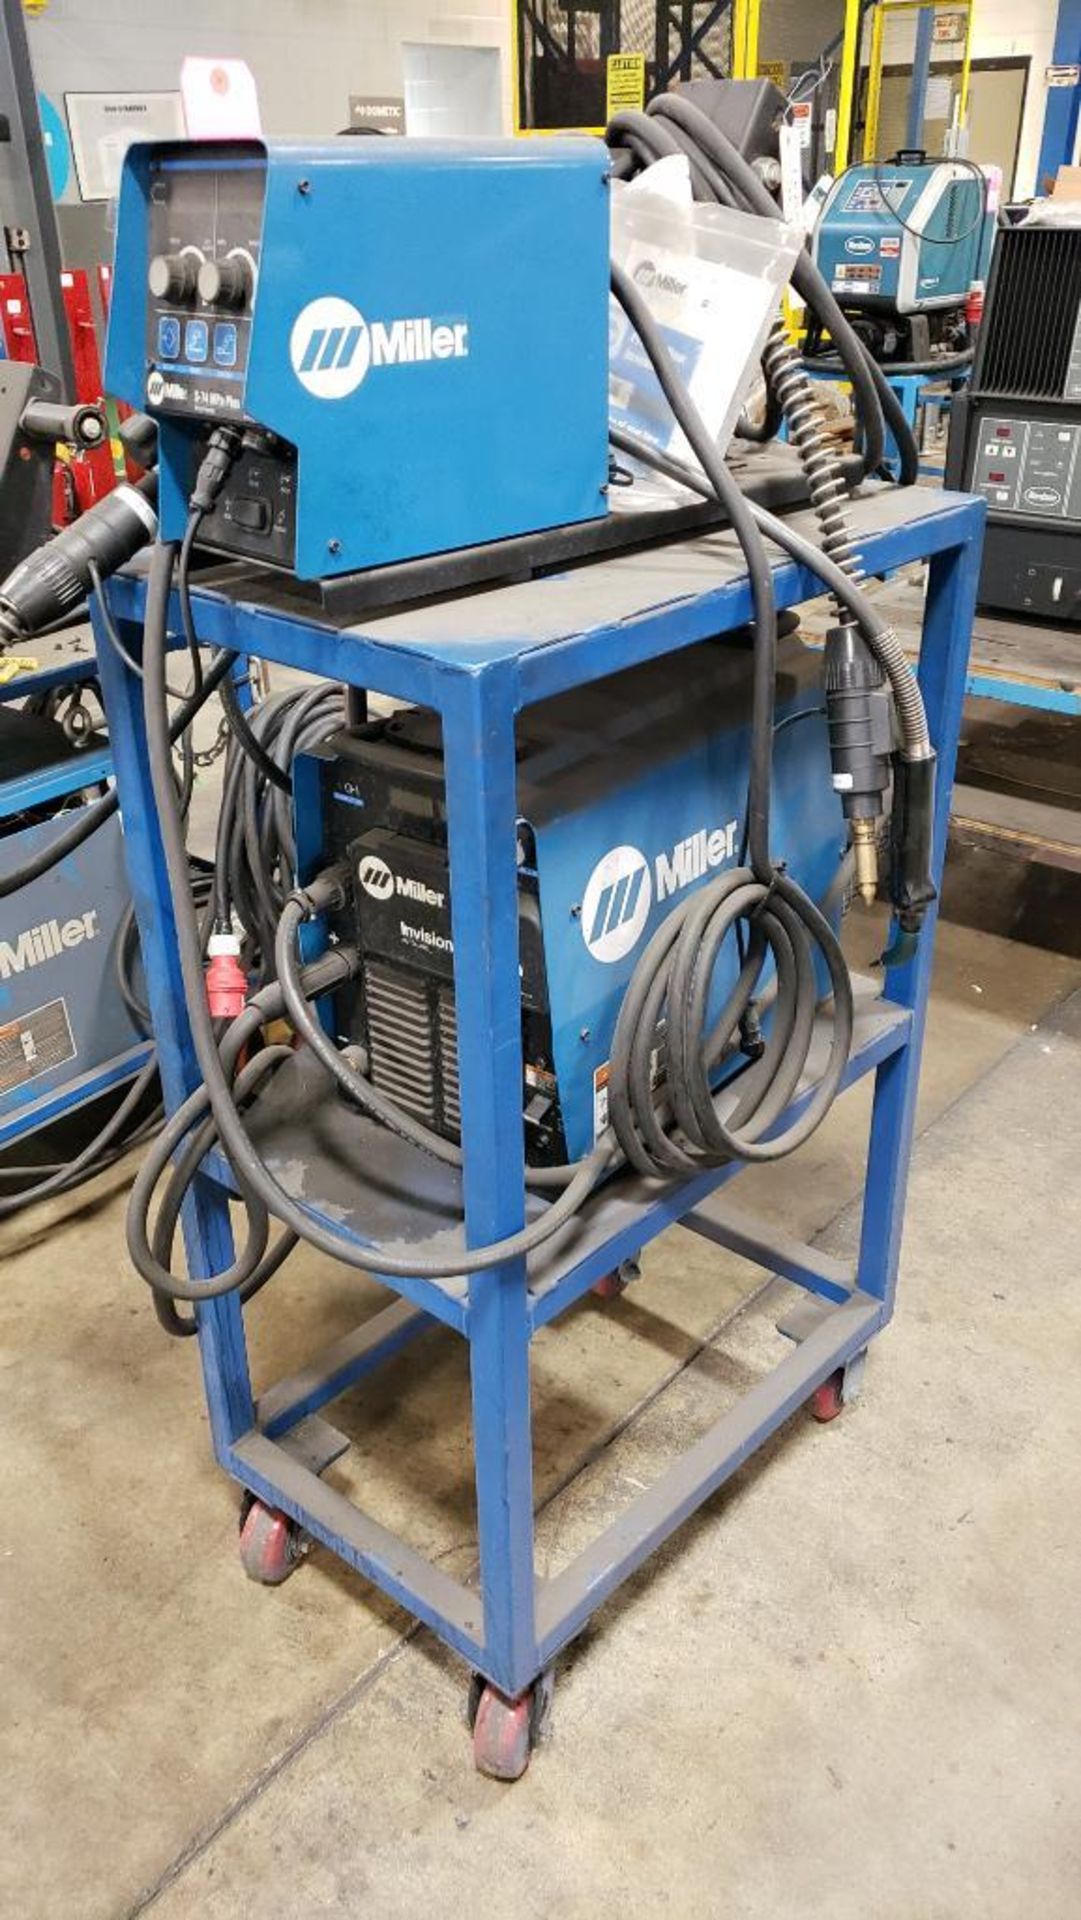 Miller Invision 352 MPa auto-line w/ Miller S-74 MPa Plus wire feeder welding system. - Image 9 of 15